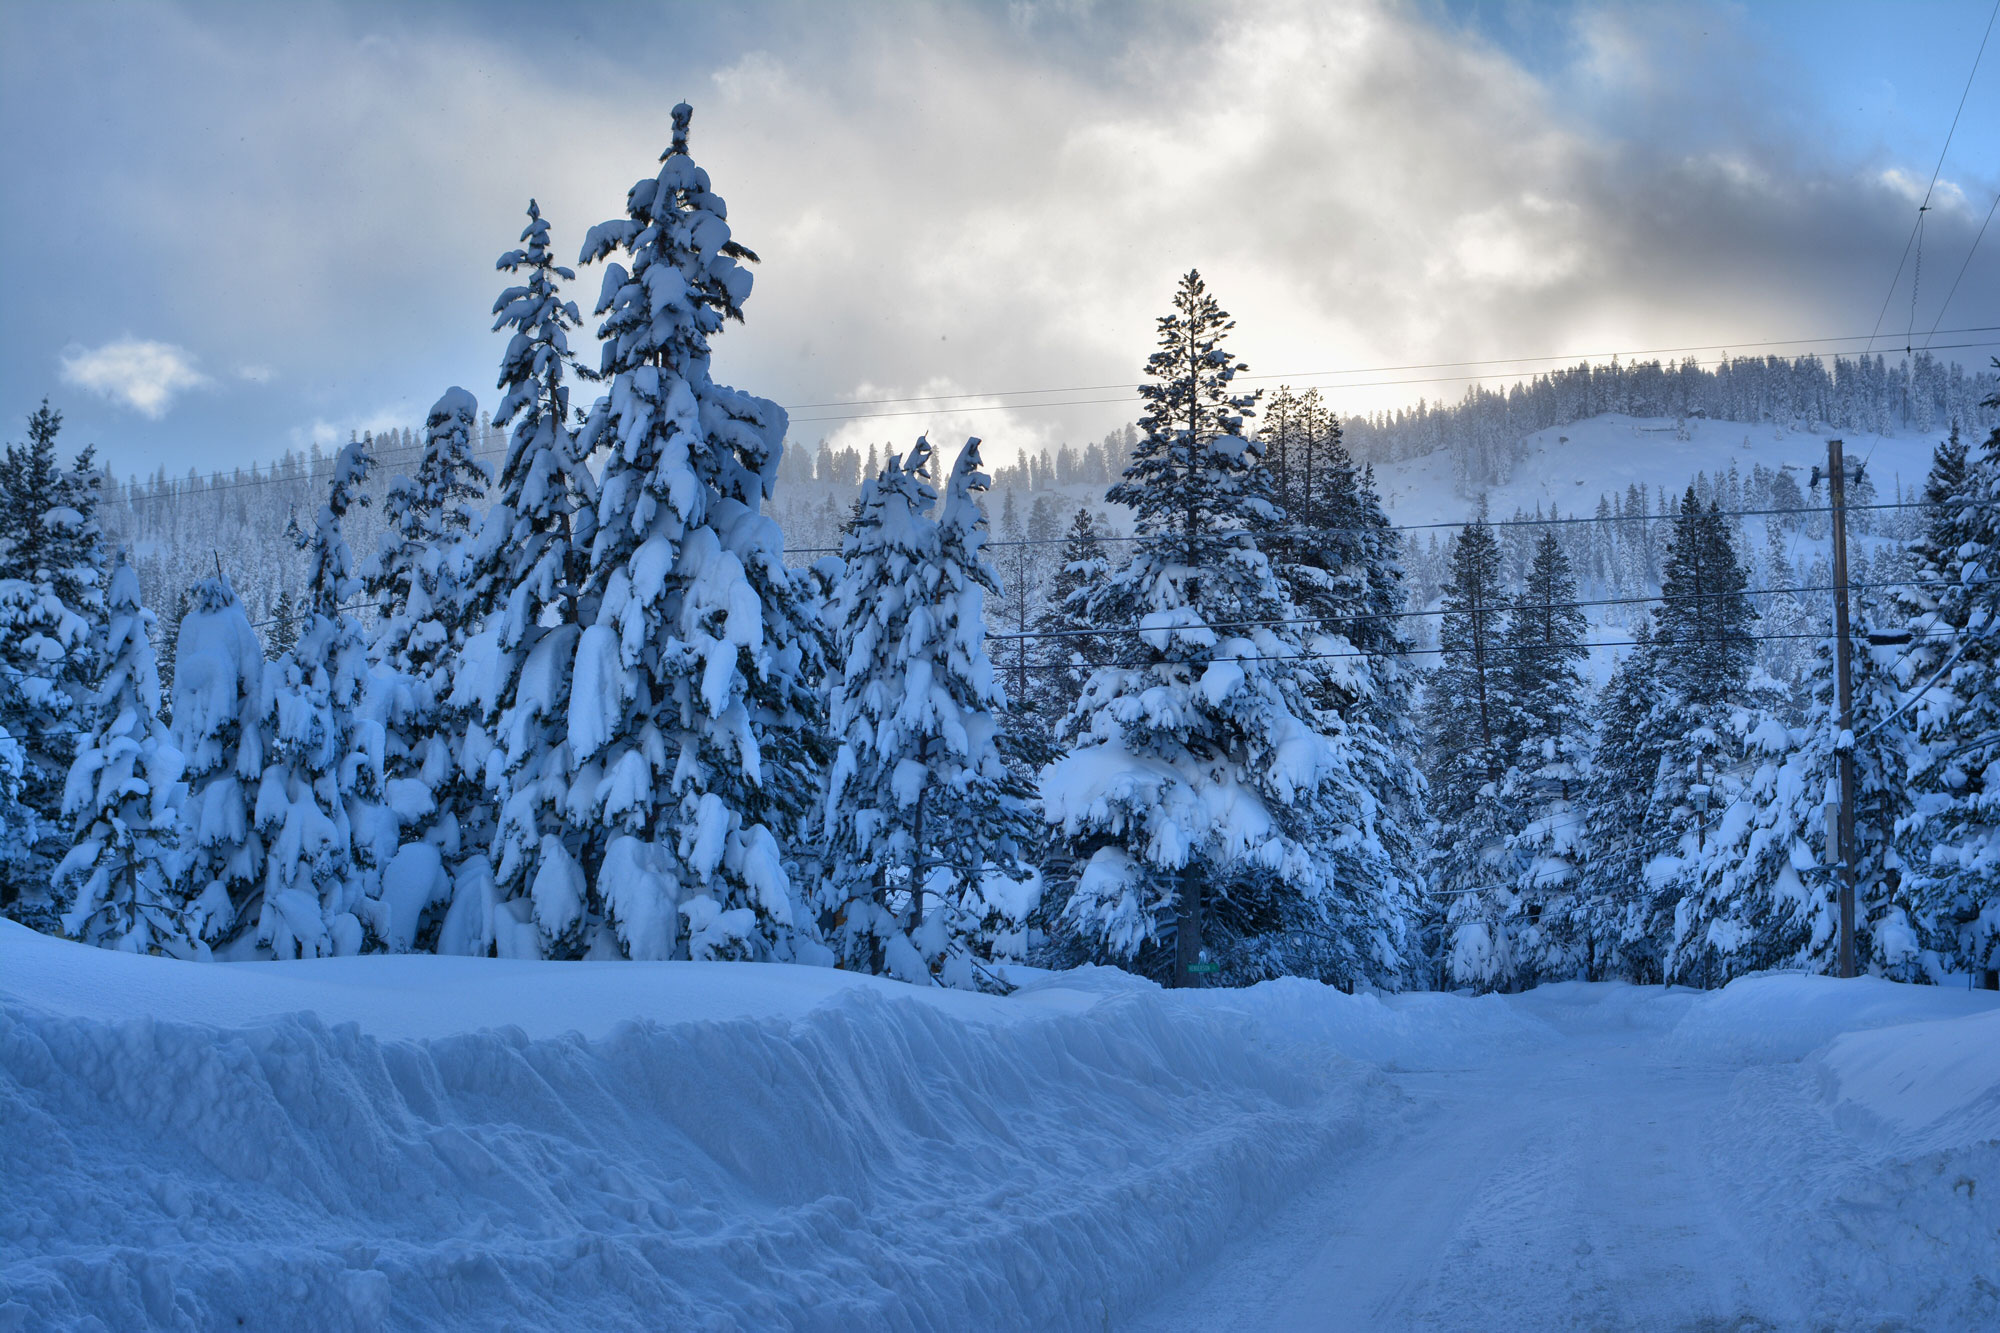 Photograph of snow near Lake Tahoe in the Sierra Nevada near the border of California and Nevada. The photo shows a plowed road covered with packed snow with short walls of snow on either side. A conifer forest is in the background, the branches of the trees covered in snow.